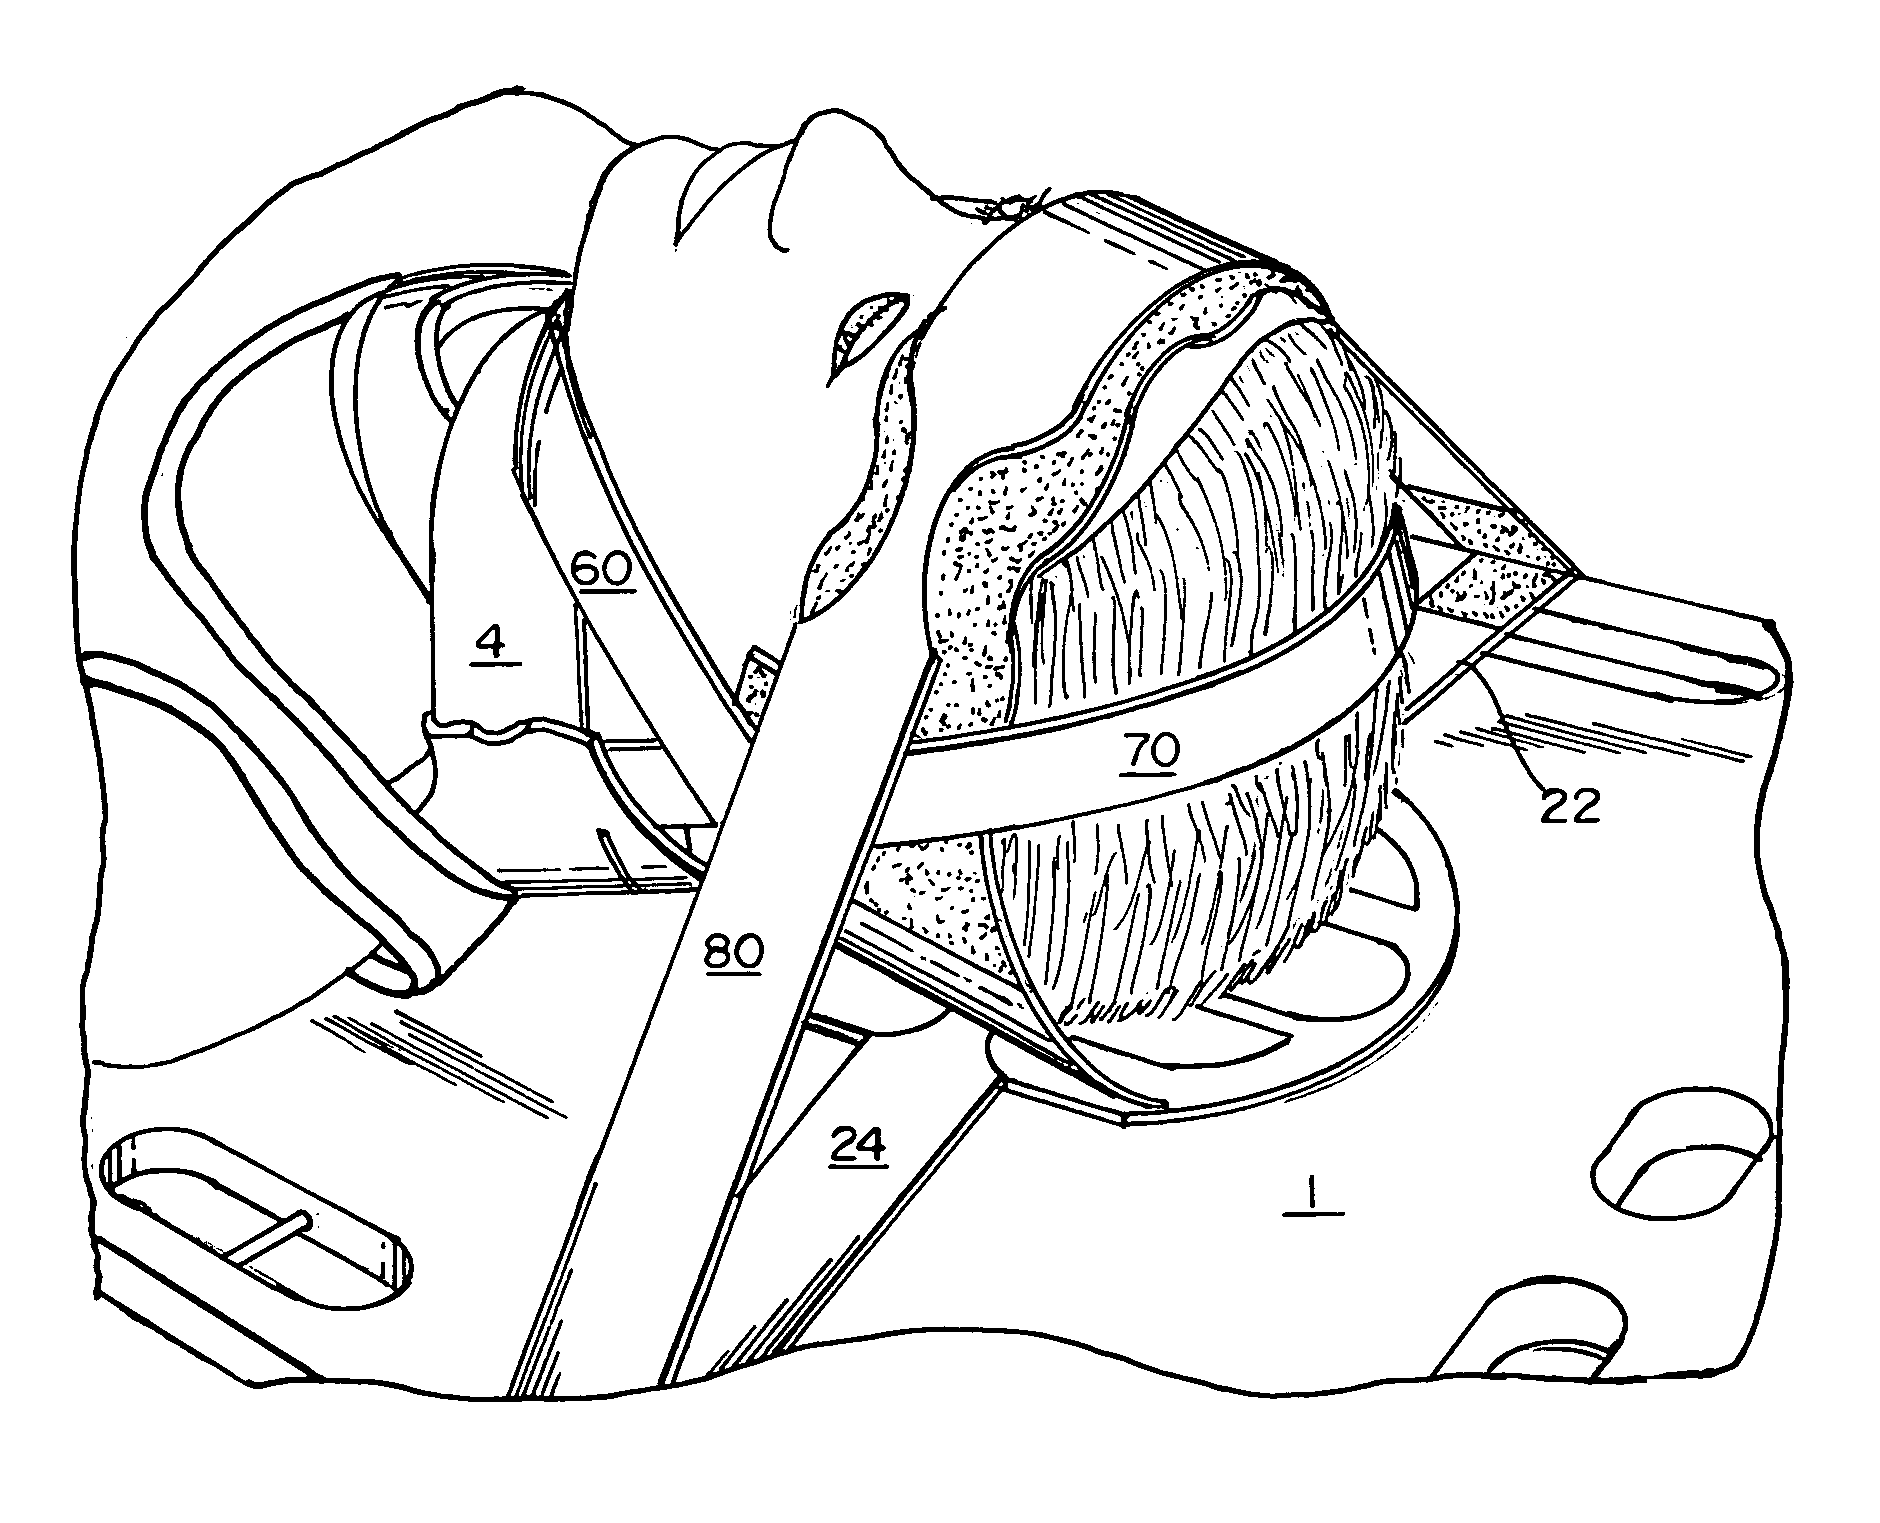 Method and device for stabilizing a patient's head on a spine board